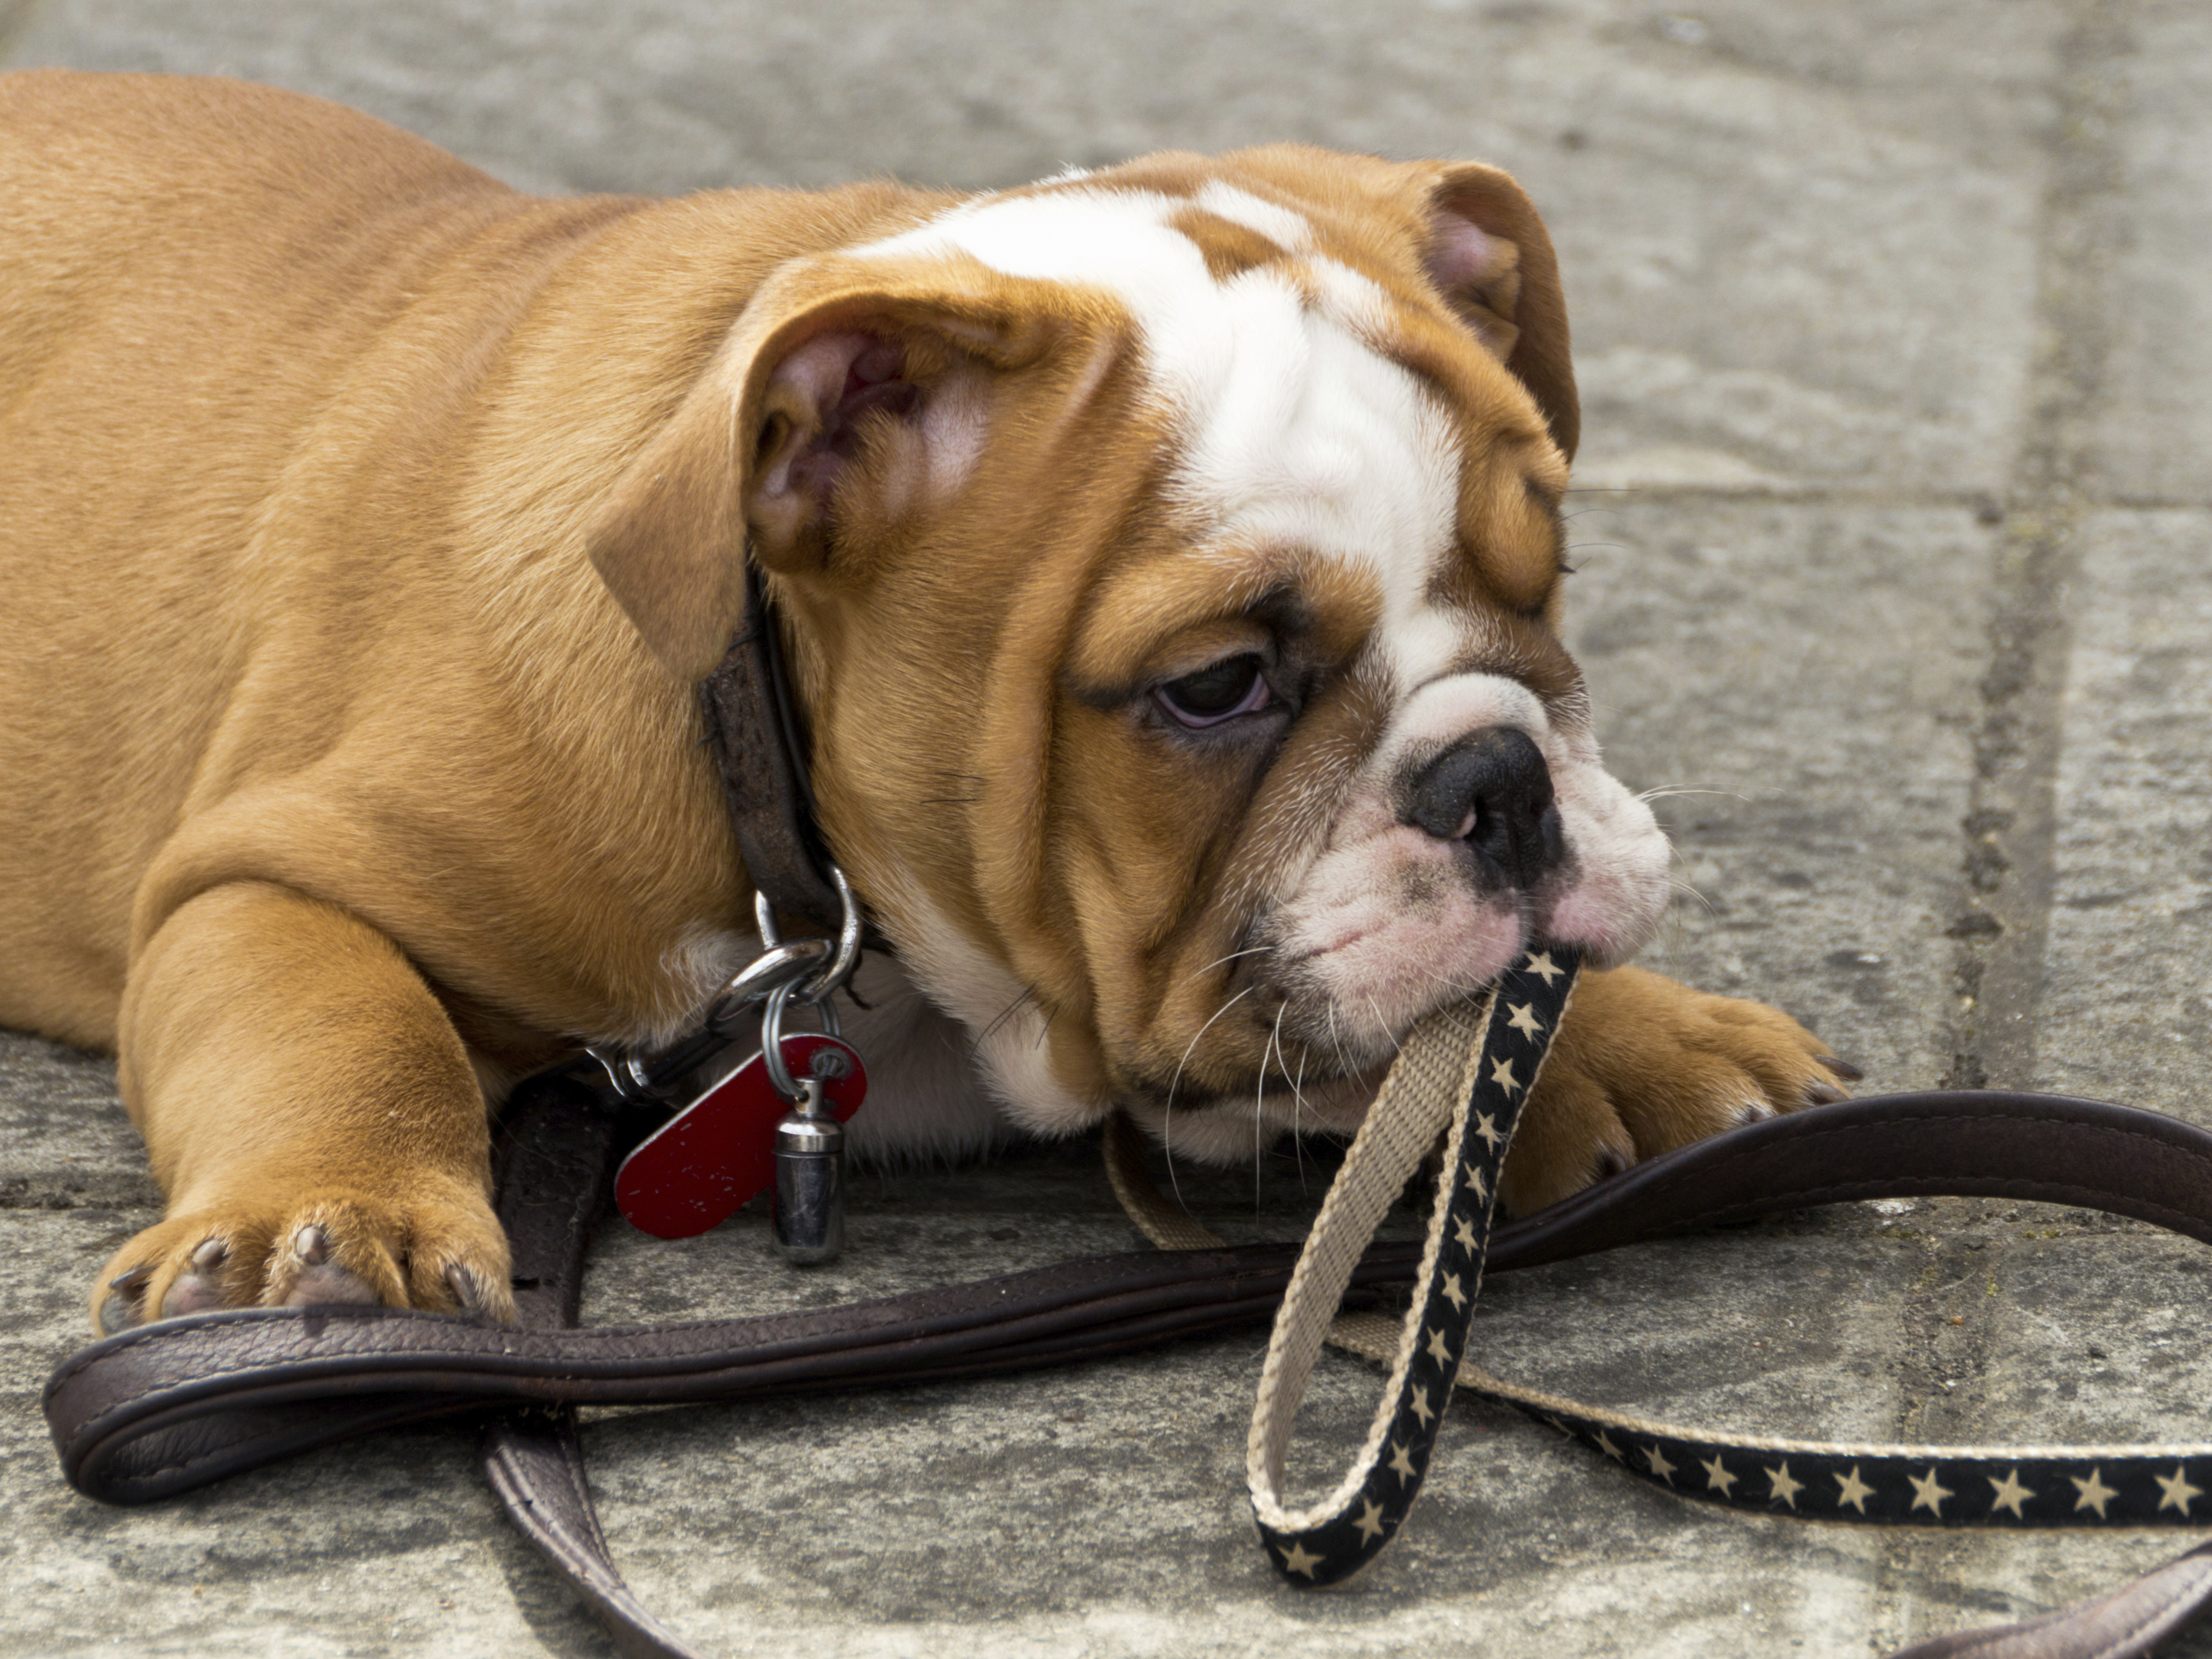 Beloved dog breed, English bulldogs, may disappear due to ...